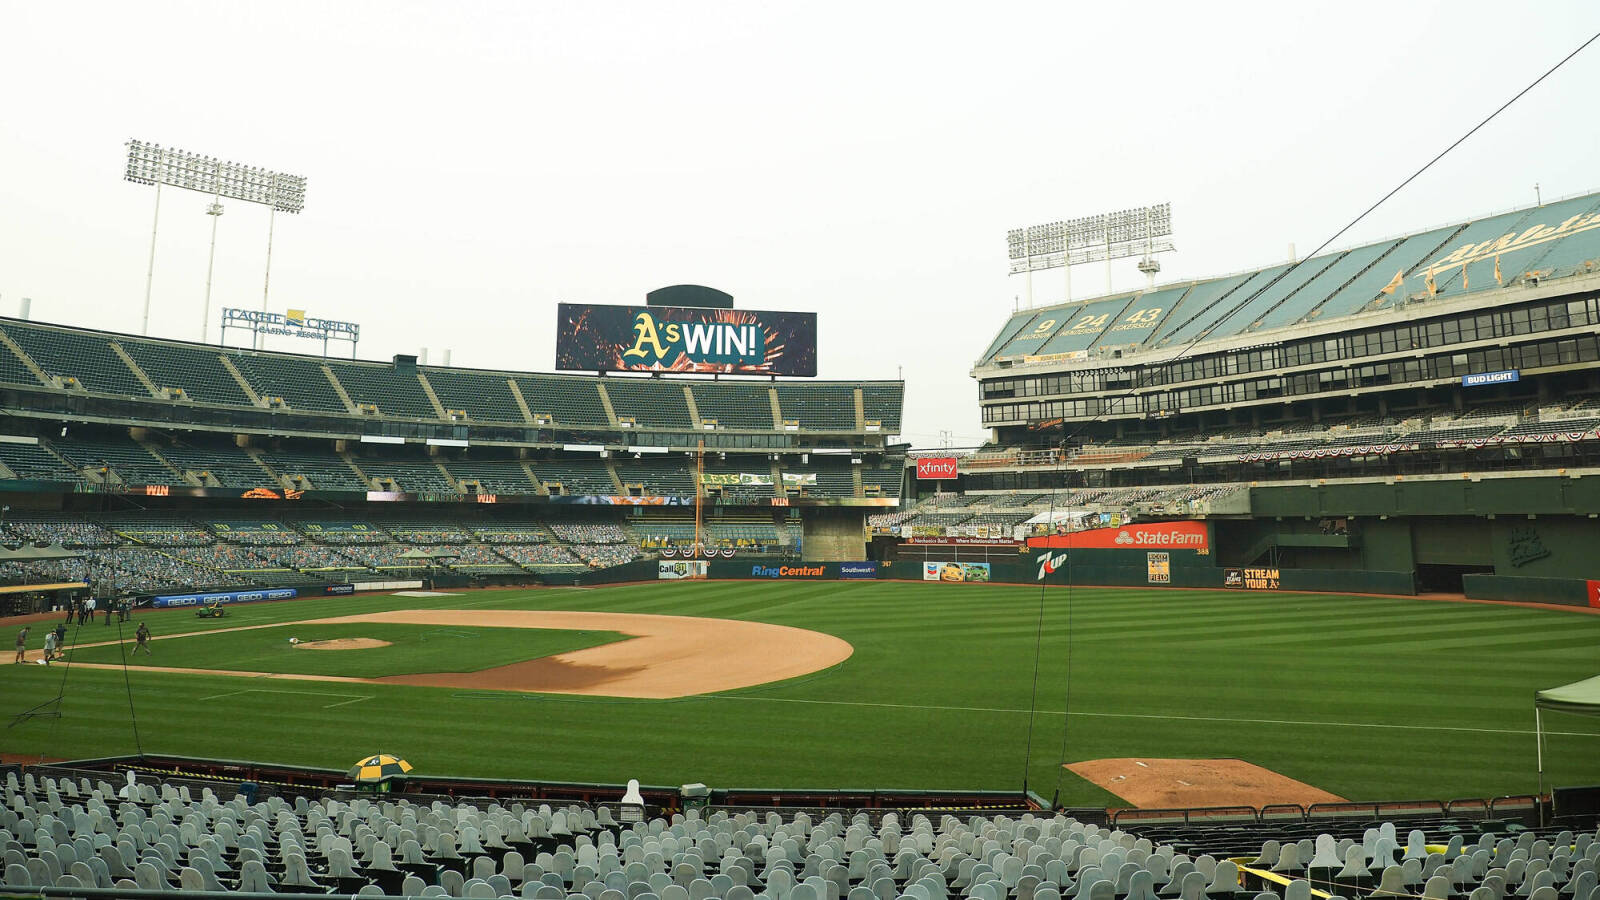 Latest on Athletics, Oakland Coliseum heading into last year of contract